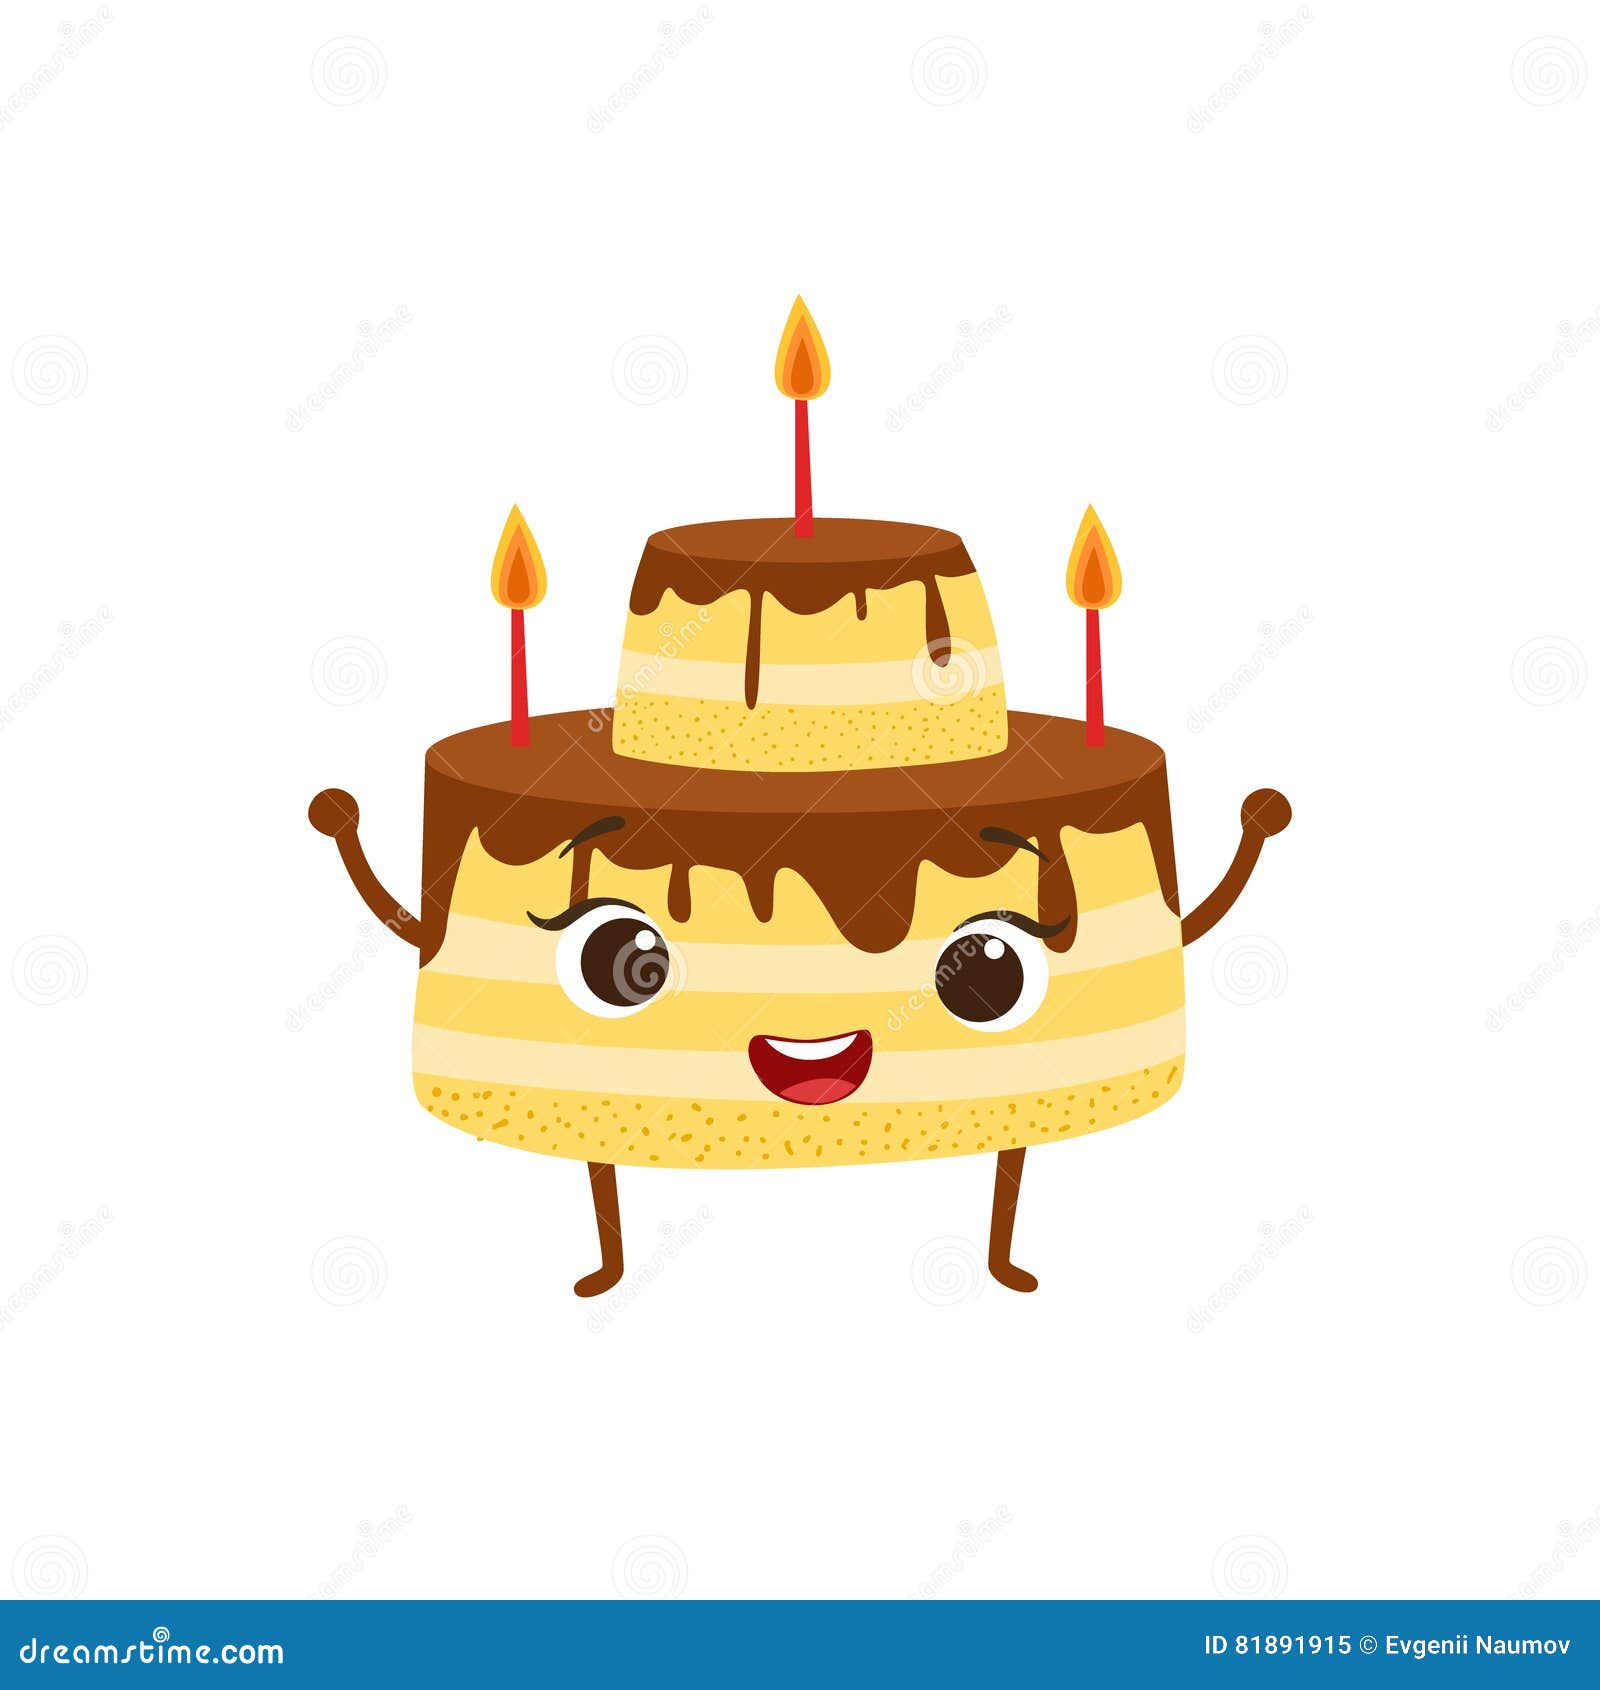 Animated Birthday Cakes With Candles GIFs | Tenor